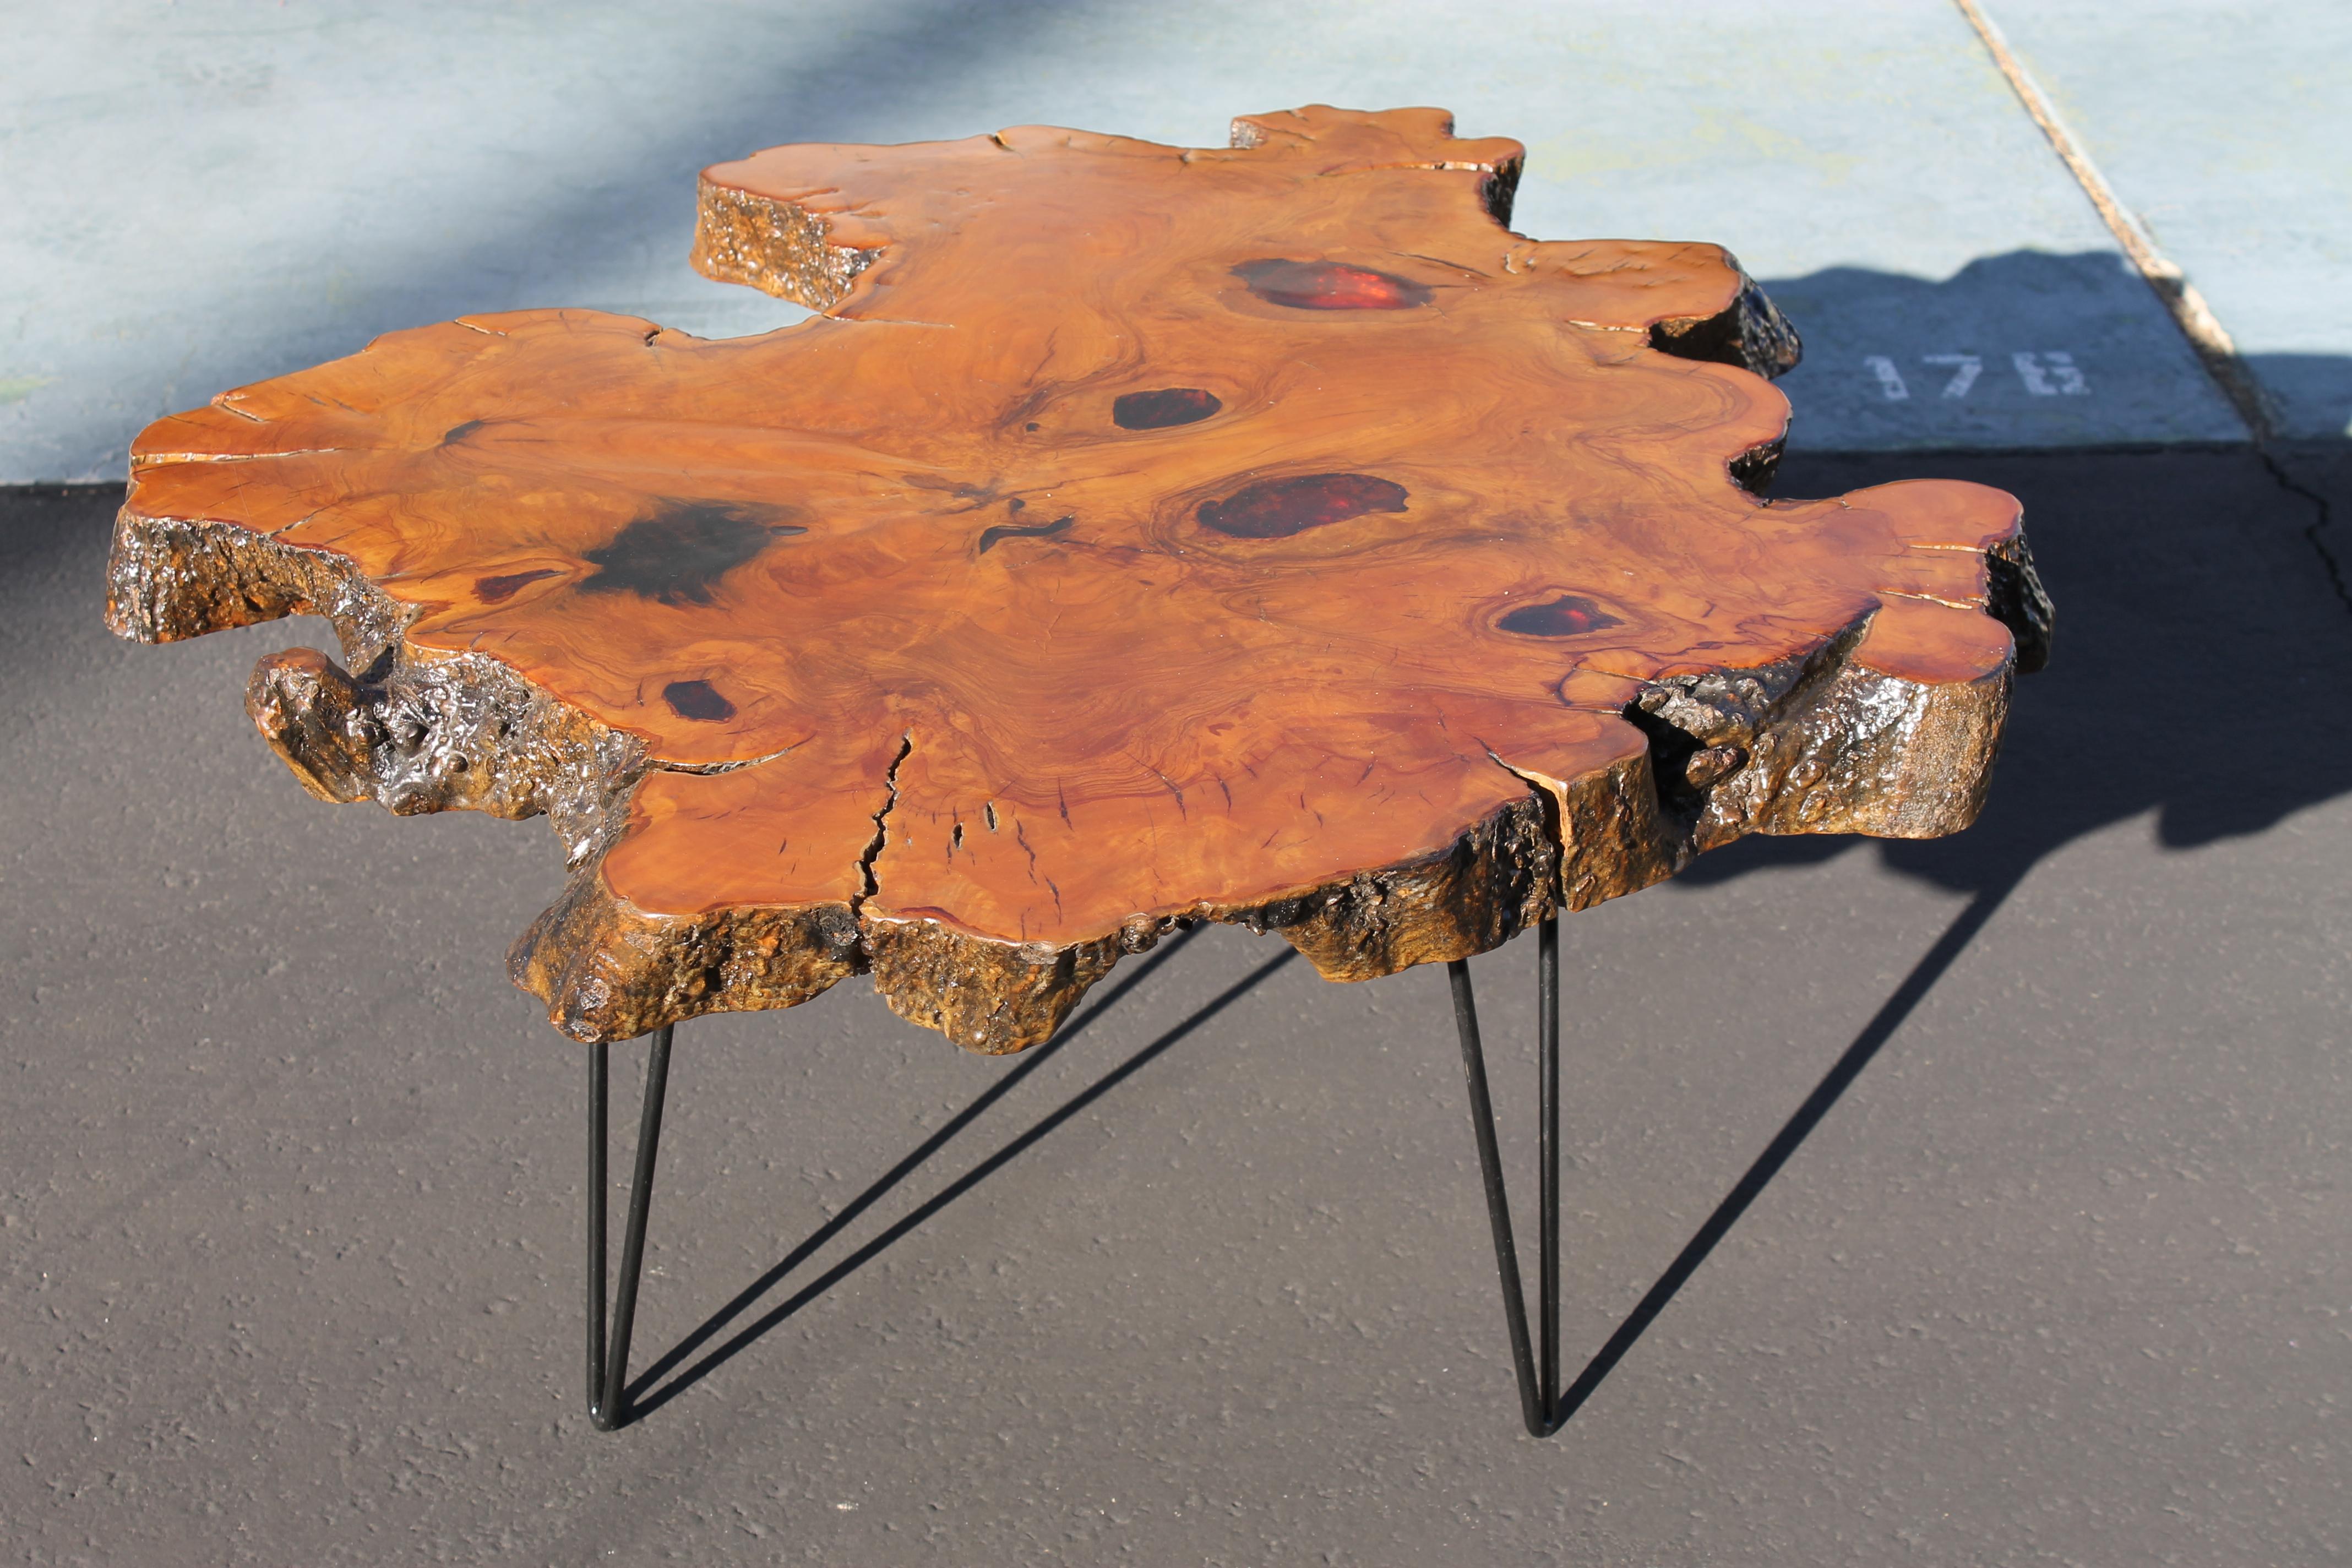 Thick burl slab table with hairpin legs, circa 1960s. This table has an interesting shape and features unusual orange resin 